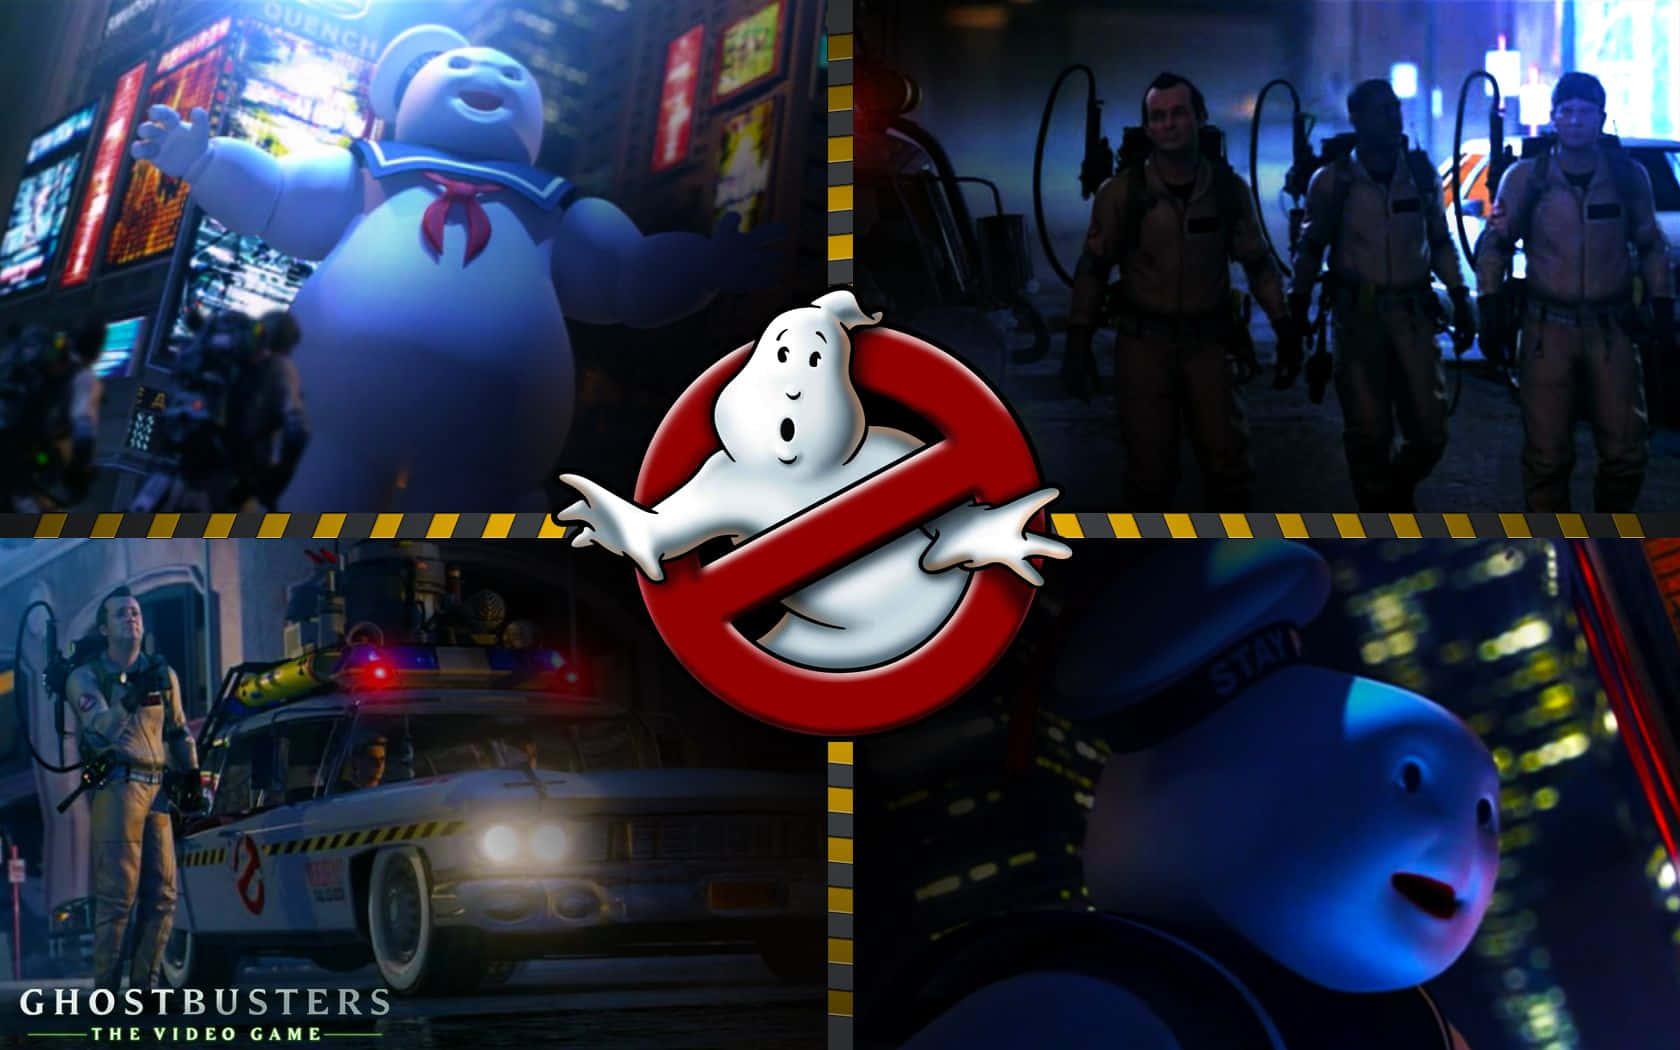 "Who you gonna call when you need help getting rid of paranormal activity?"